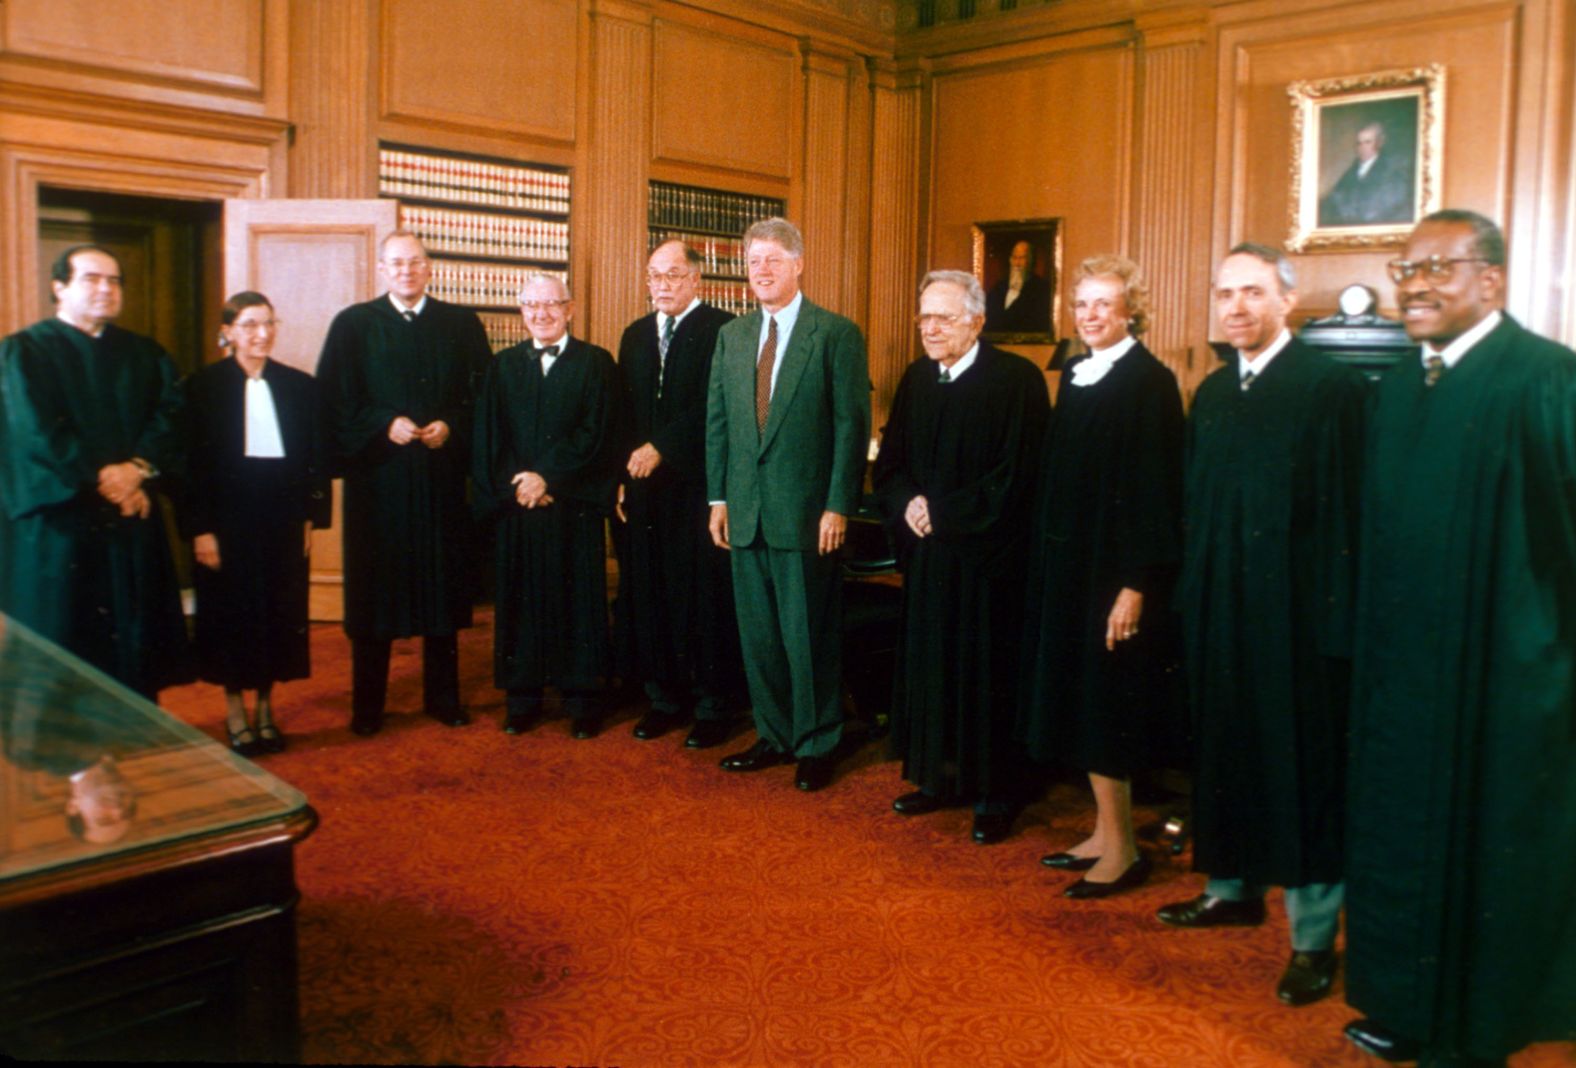 President Bill Clinton poses with members of the Supreme Court in Washington on October 1, 1993. From left are Antonin Scalia, Ruth Bader Ginsburg, Anthony Kennedy, Stevens, Chief Justice William Rehnquist, Clinton, Harry Blackmun, Sandra Day O'Connor, David Souter and Clarence Thomas.